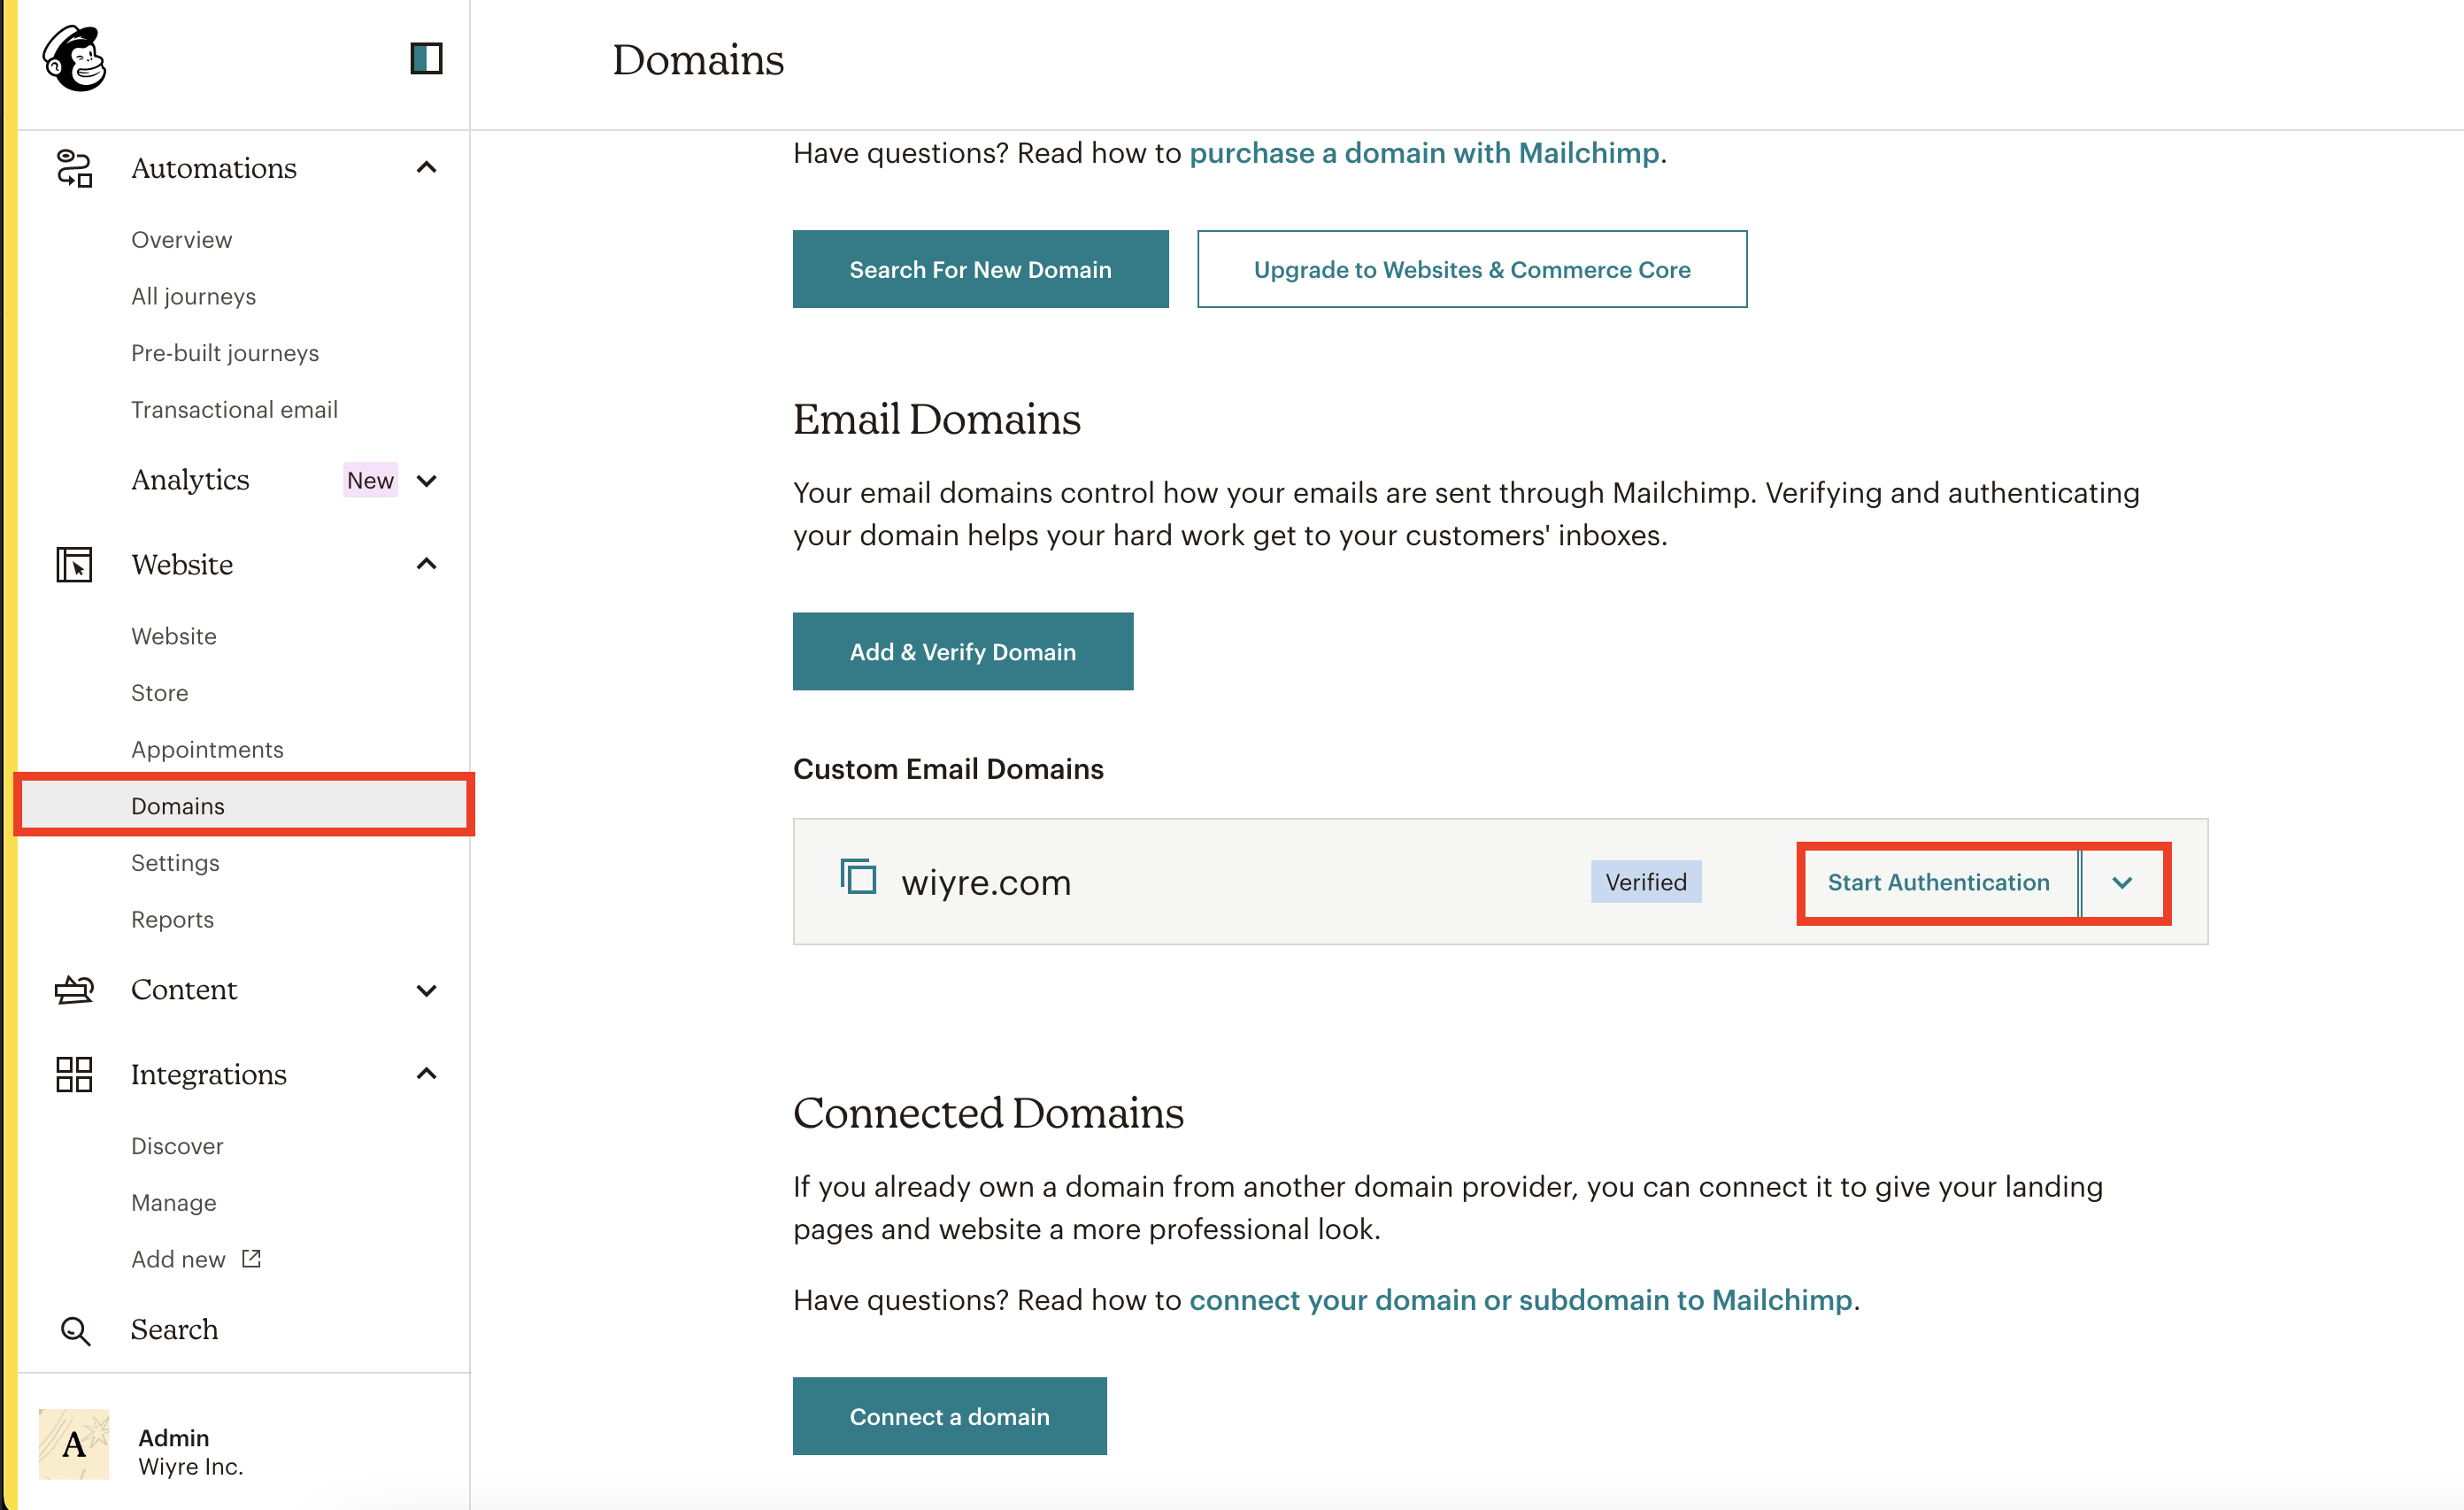 Step one of authenticating your domain on Mailchimp